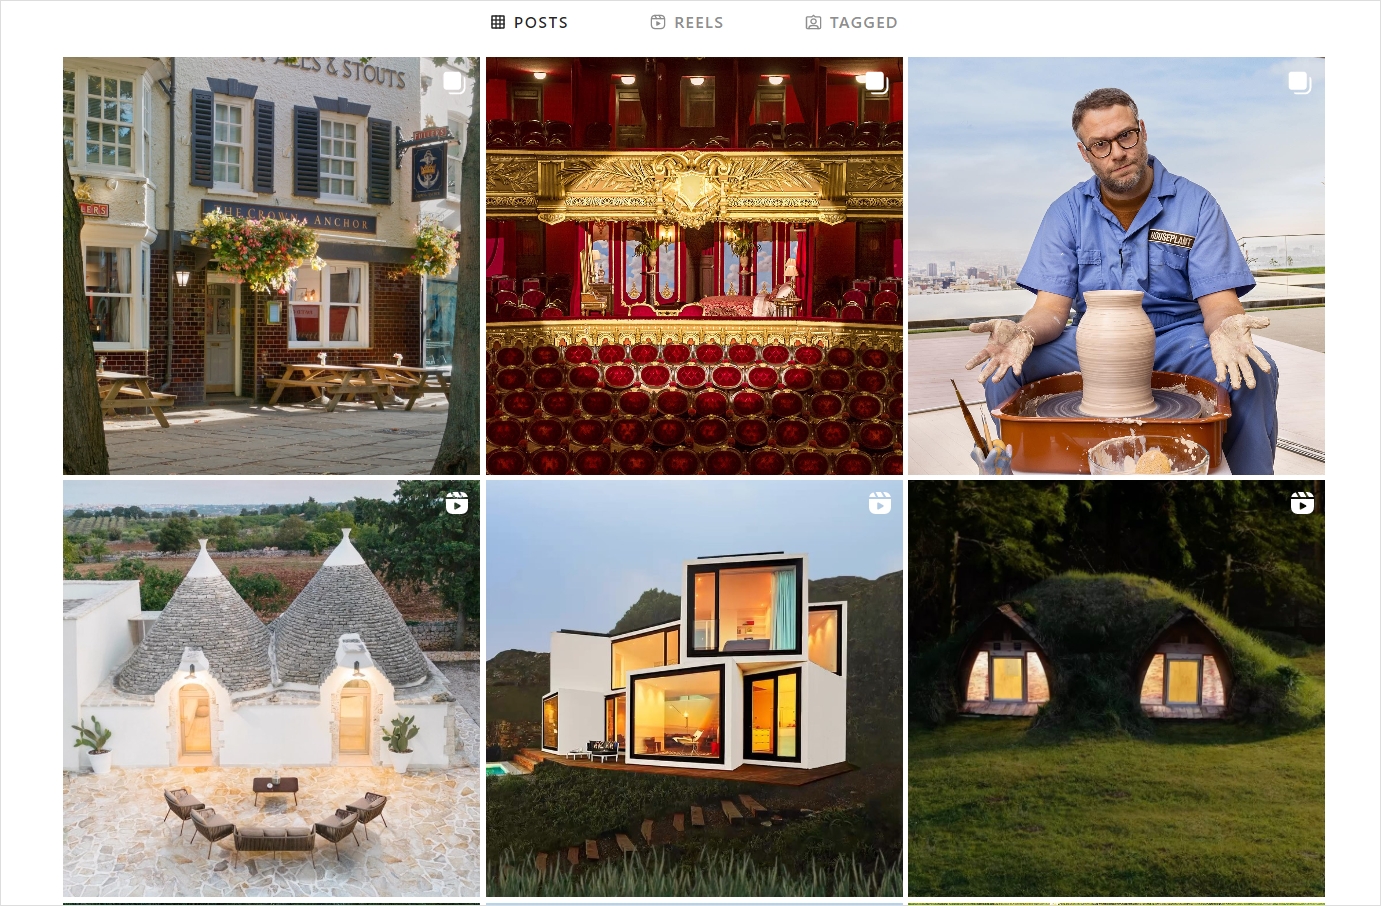 Airbnb optimized images for seo